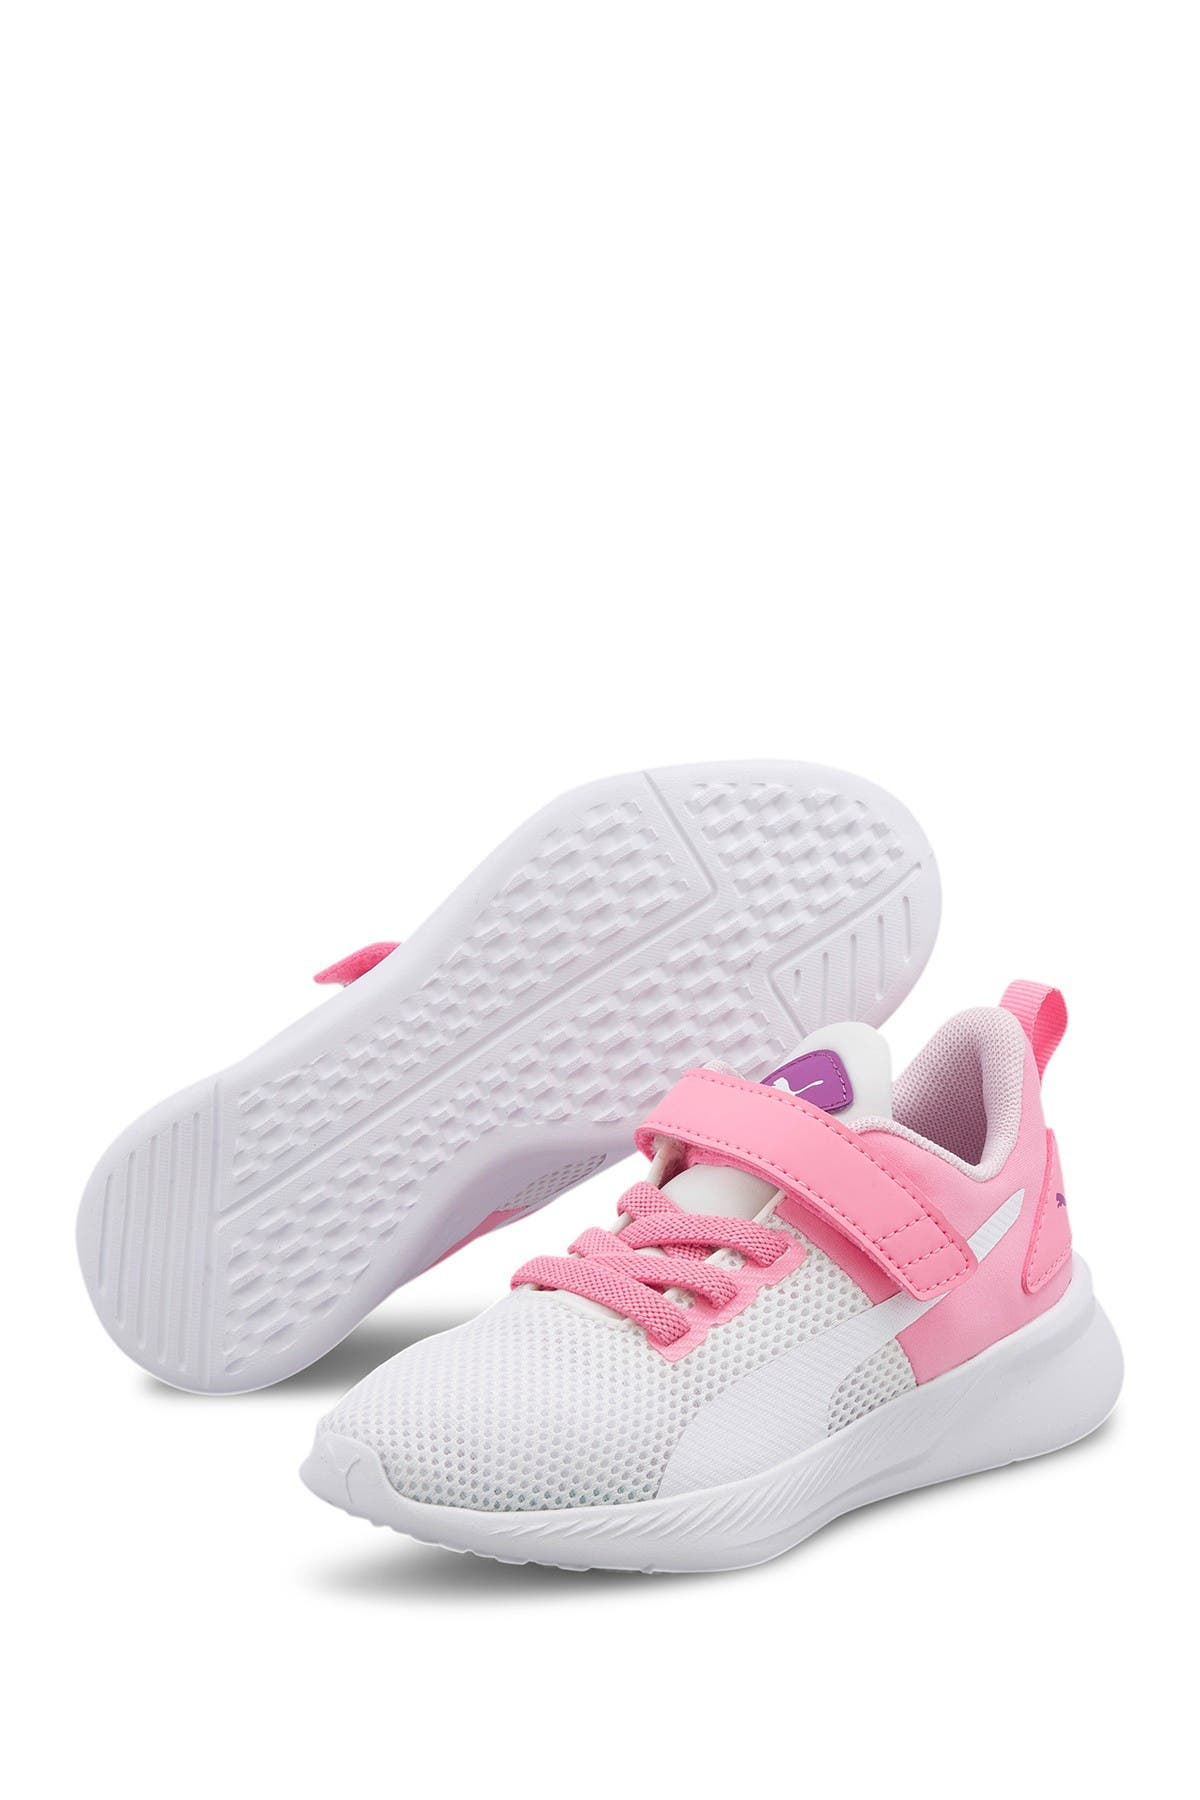 puma baby girl shoes